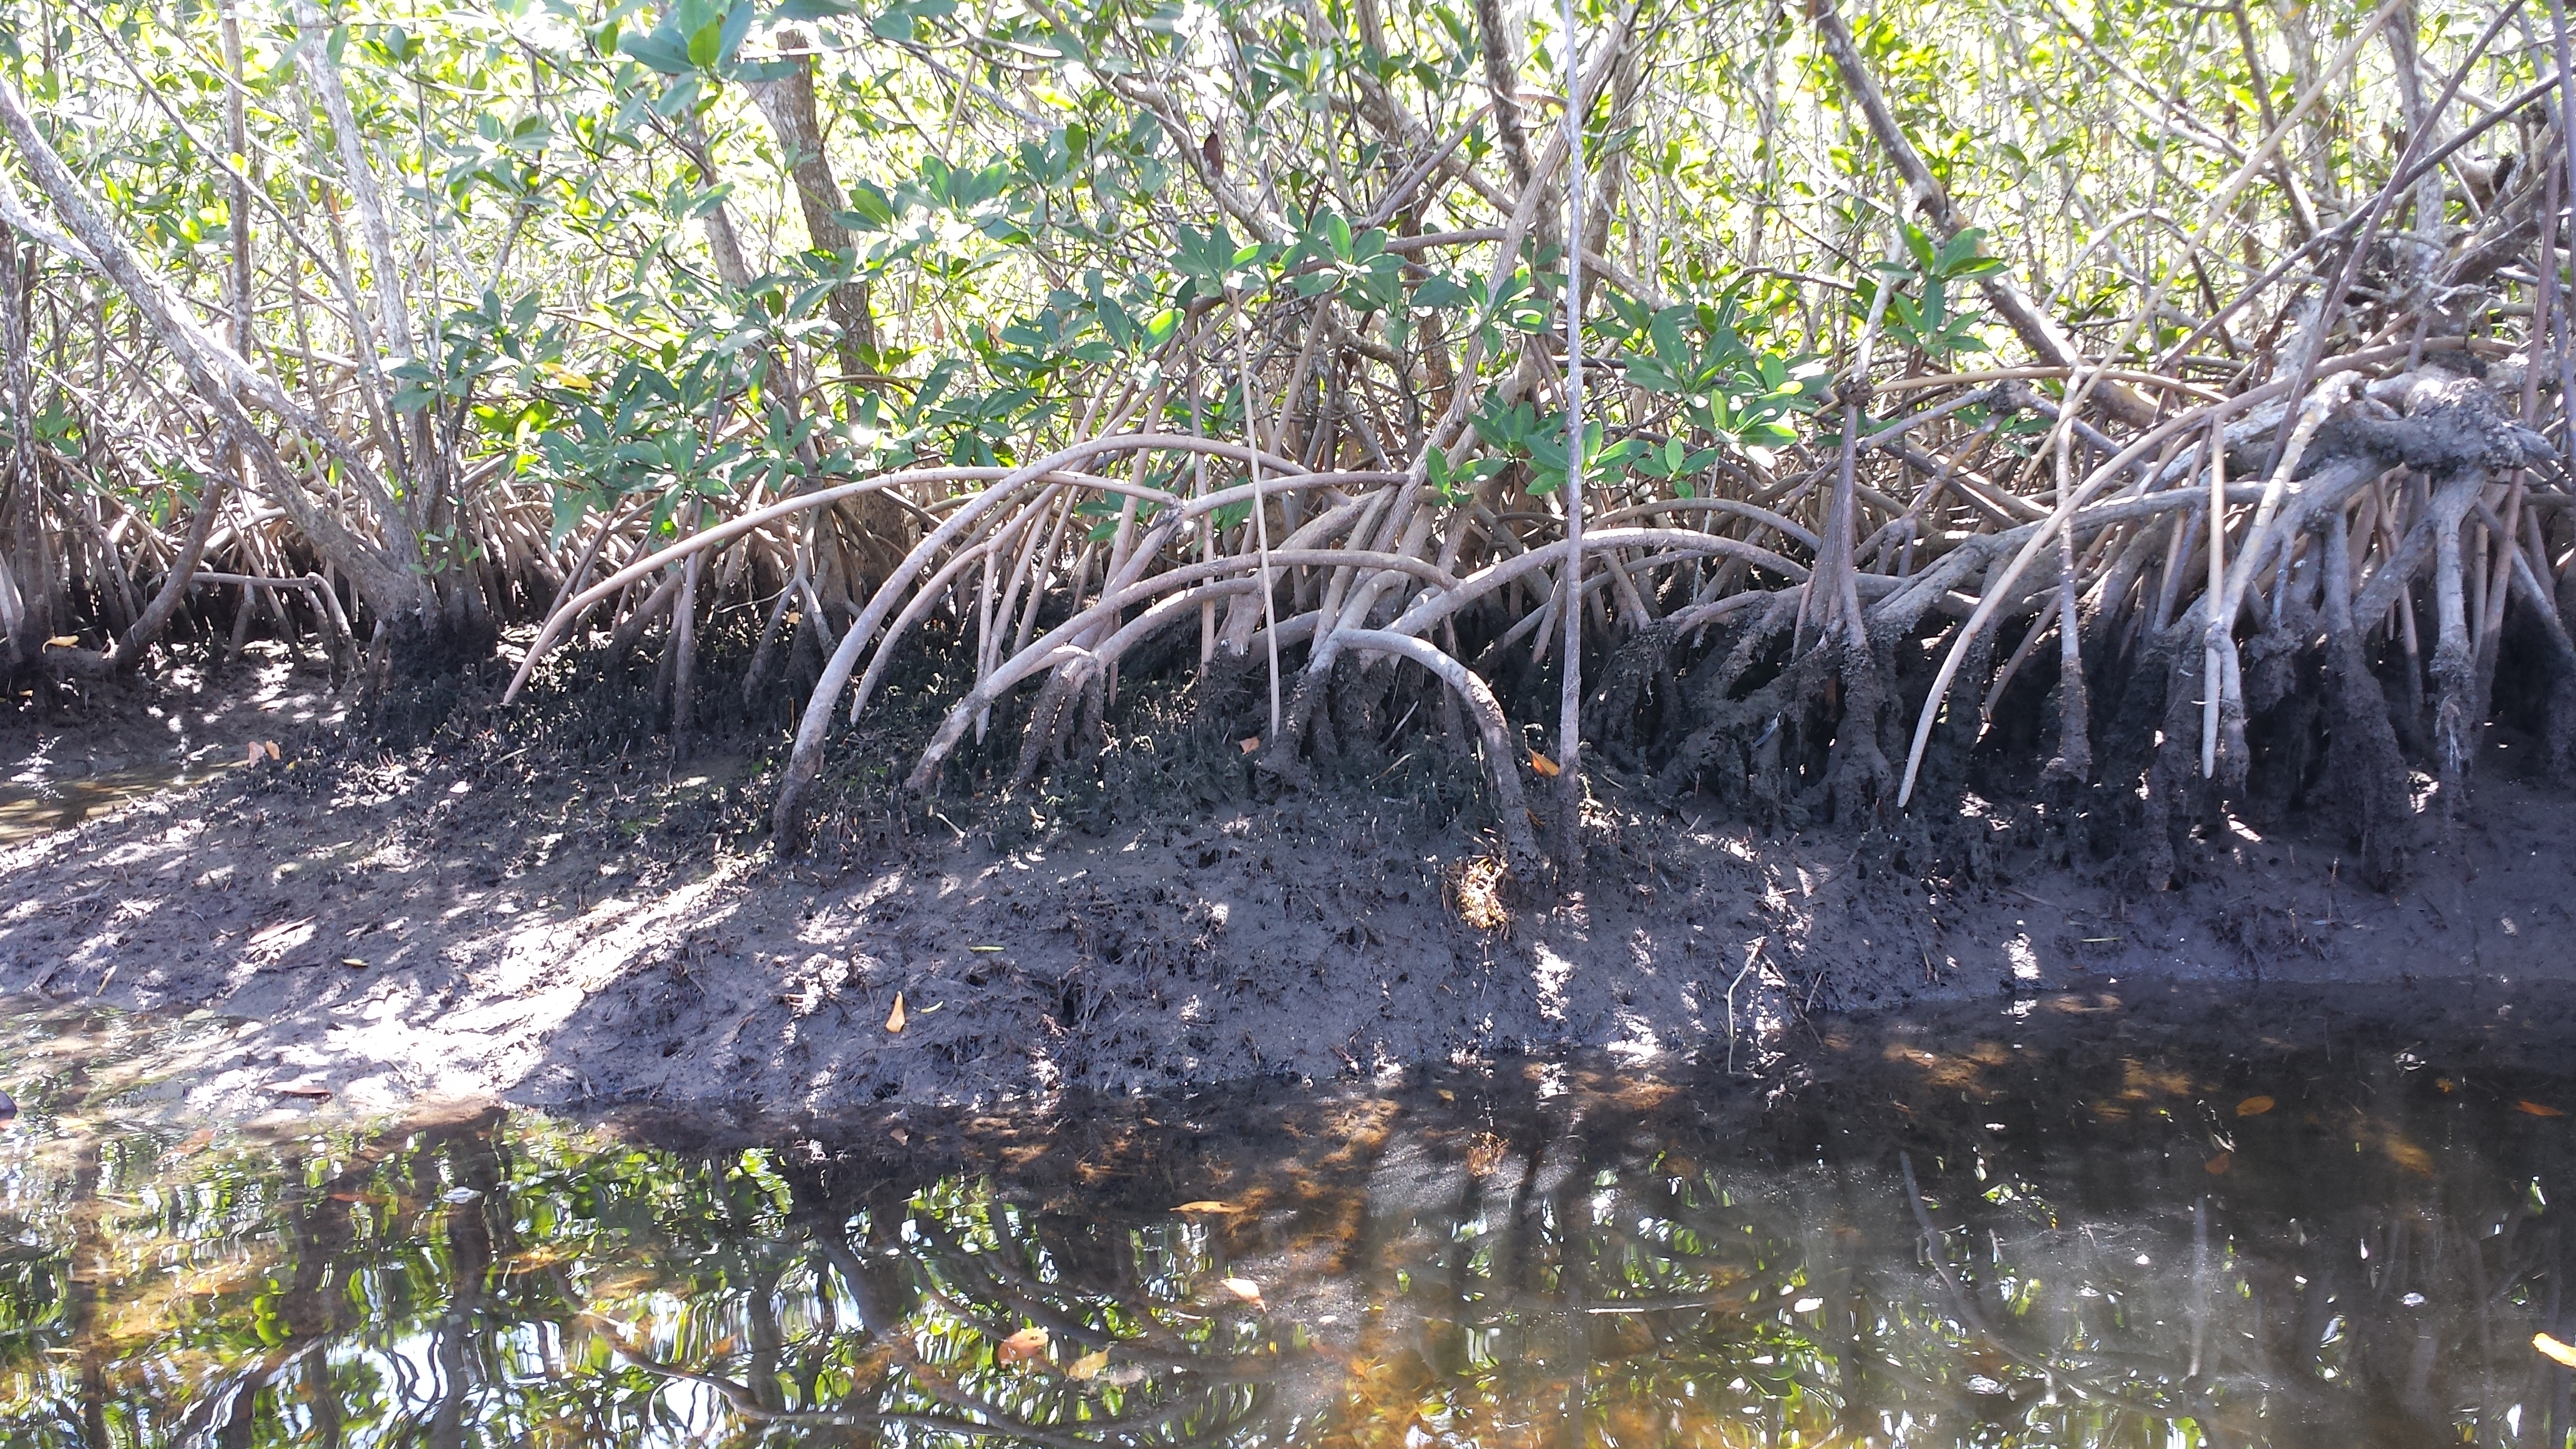 Mangrove roots in Biscayne National Park